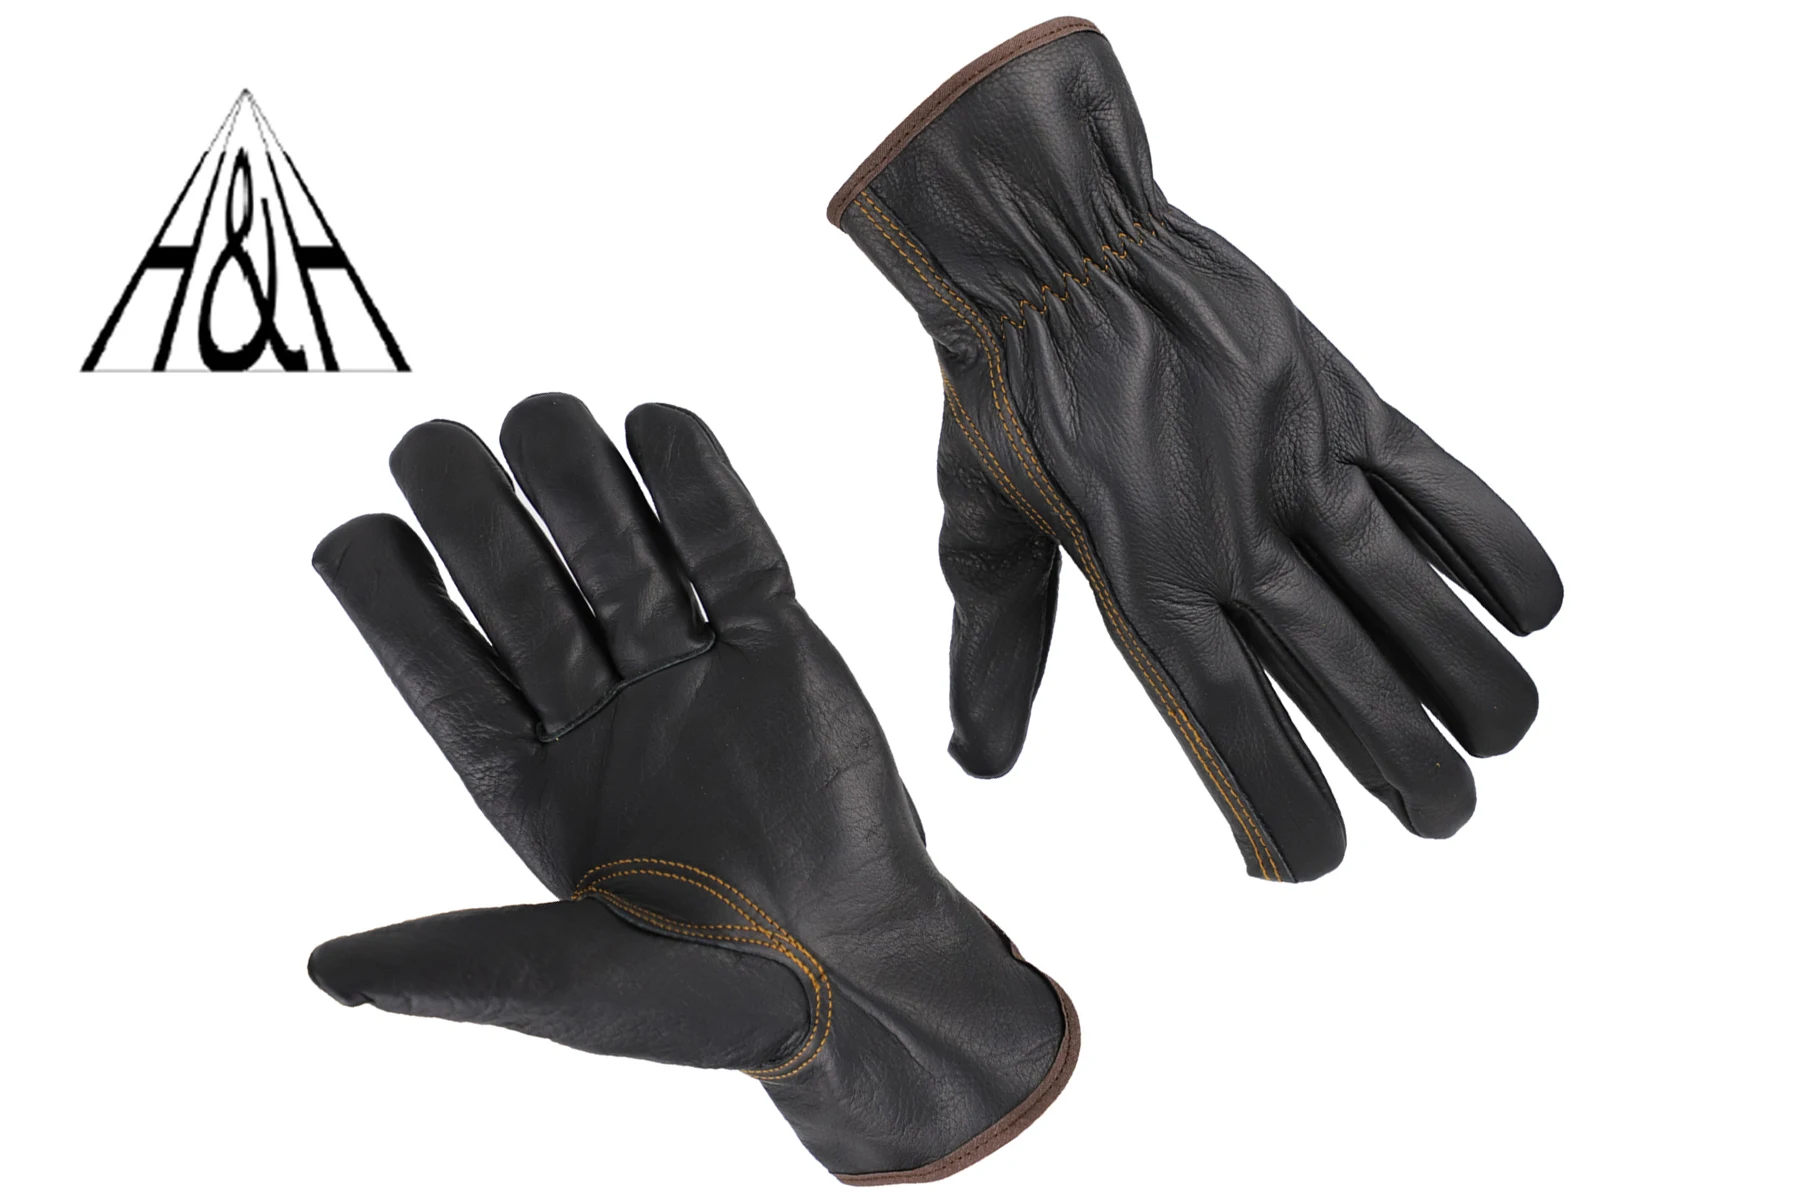 

2PAIR HHPROTECT Unlined Cowhide Split Leather Work and Driver Gloves, for Heavy Duty, Truck Driving, Warehouse, Gardening, Farm